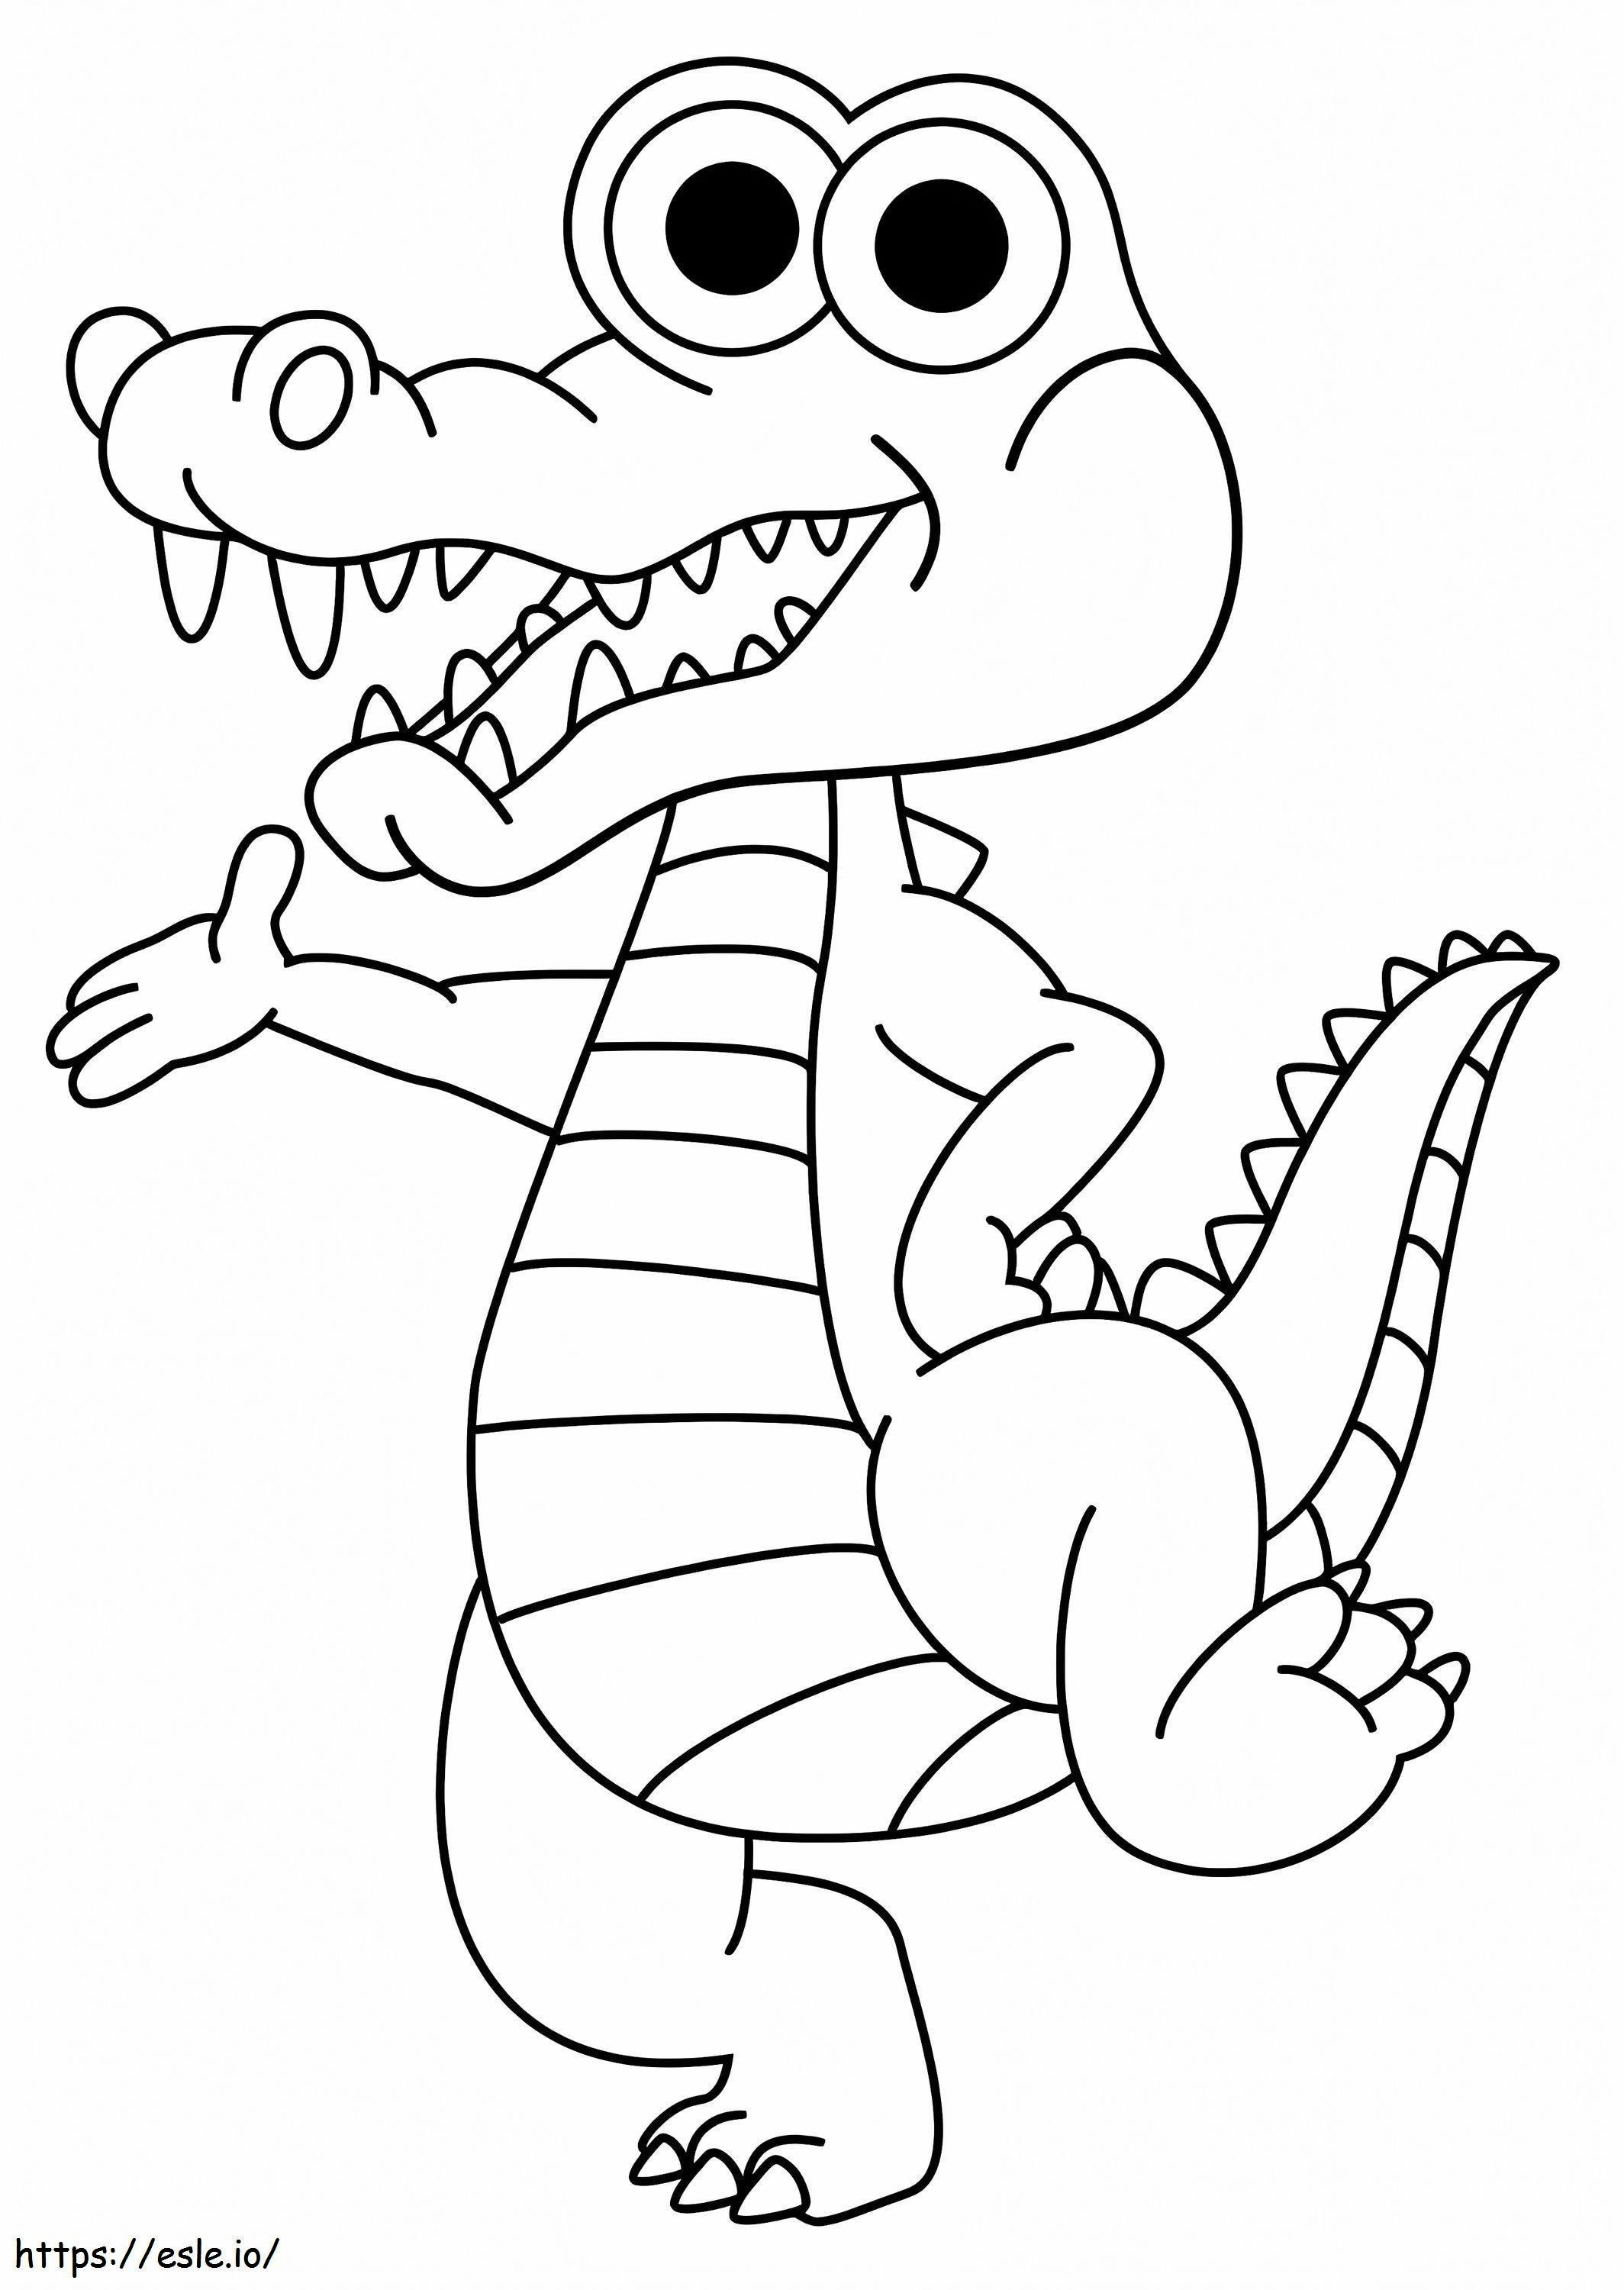 Alligator For Kids coloring page